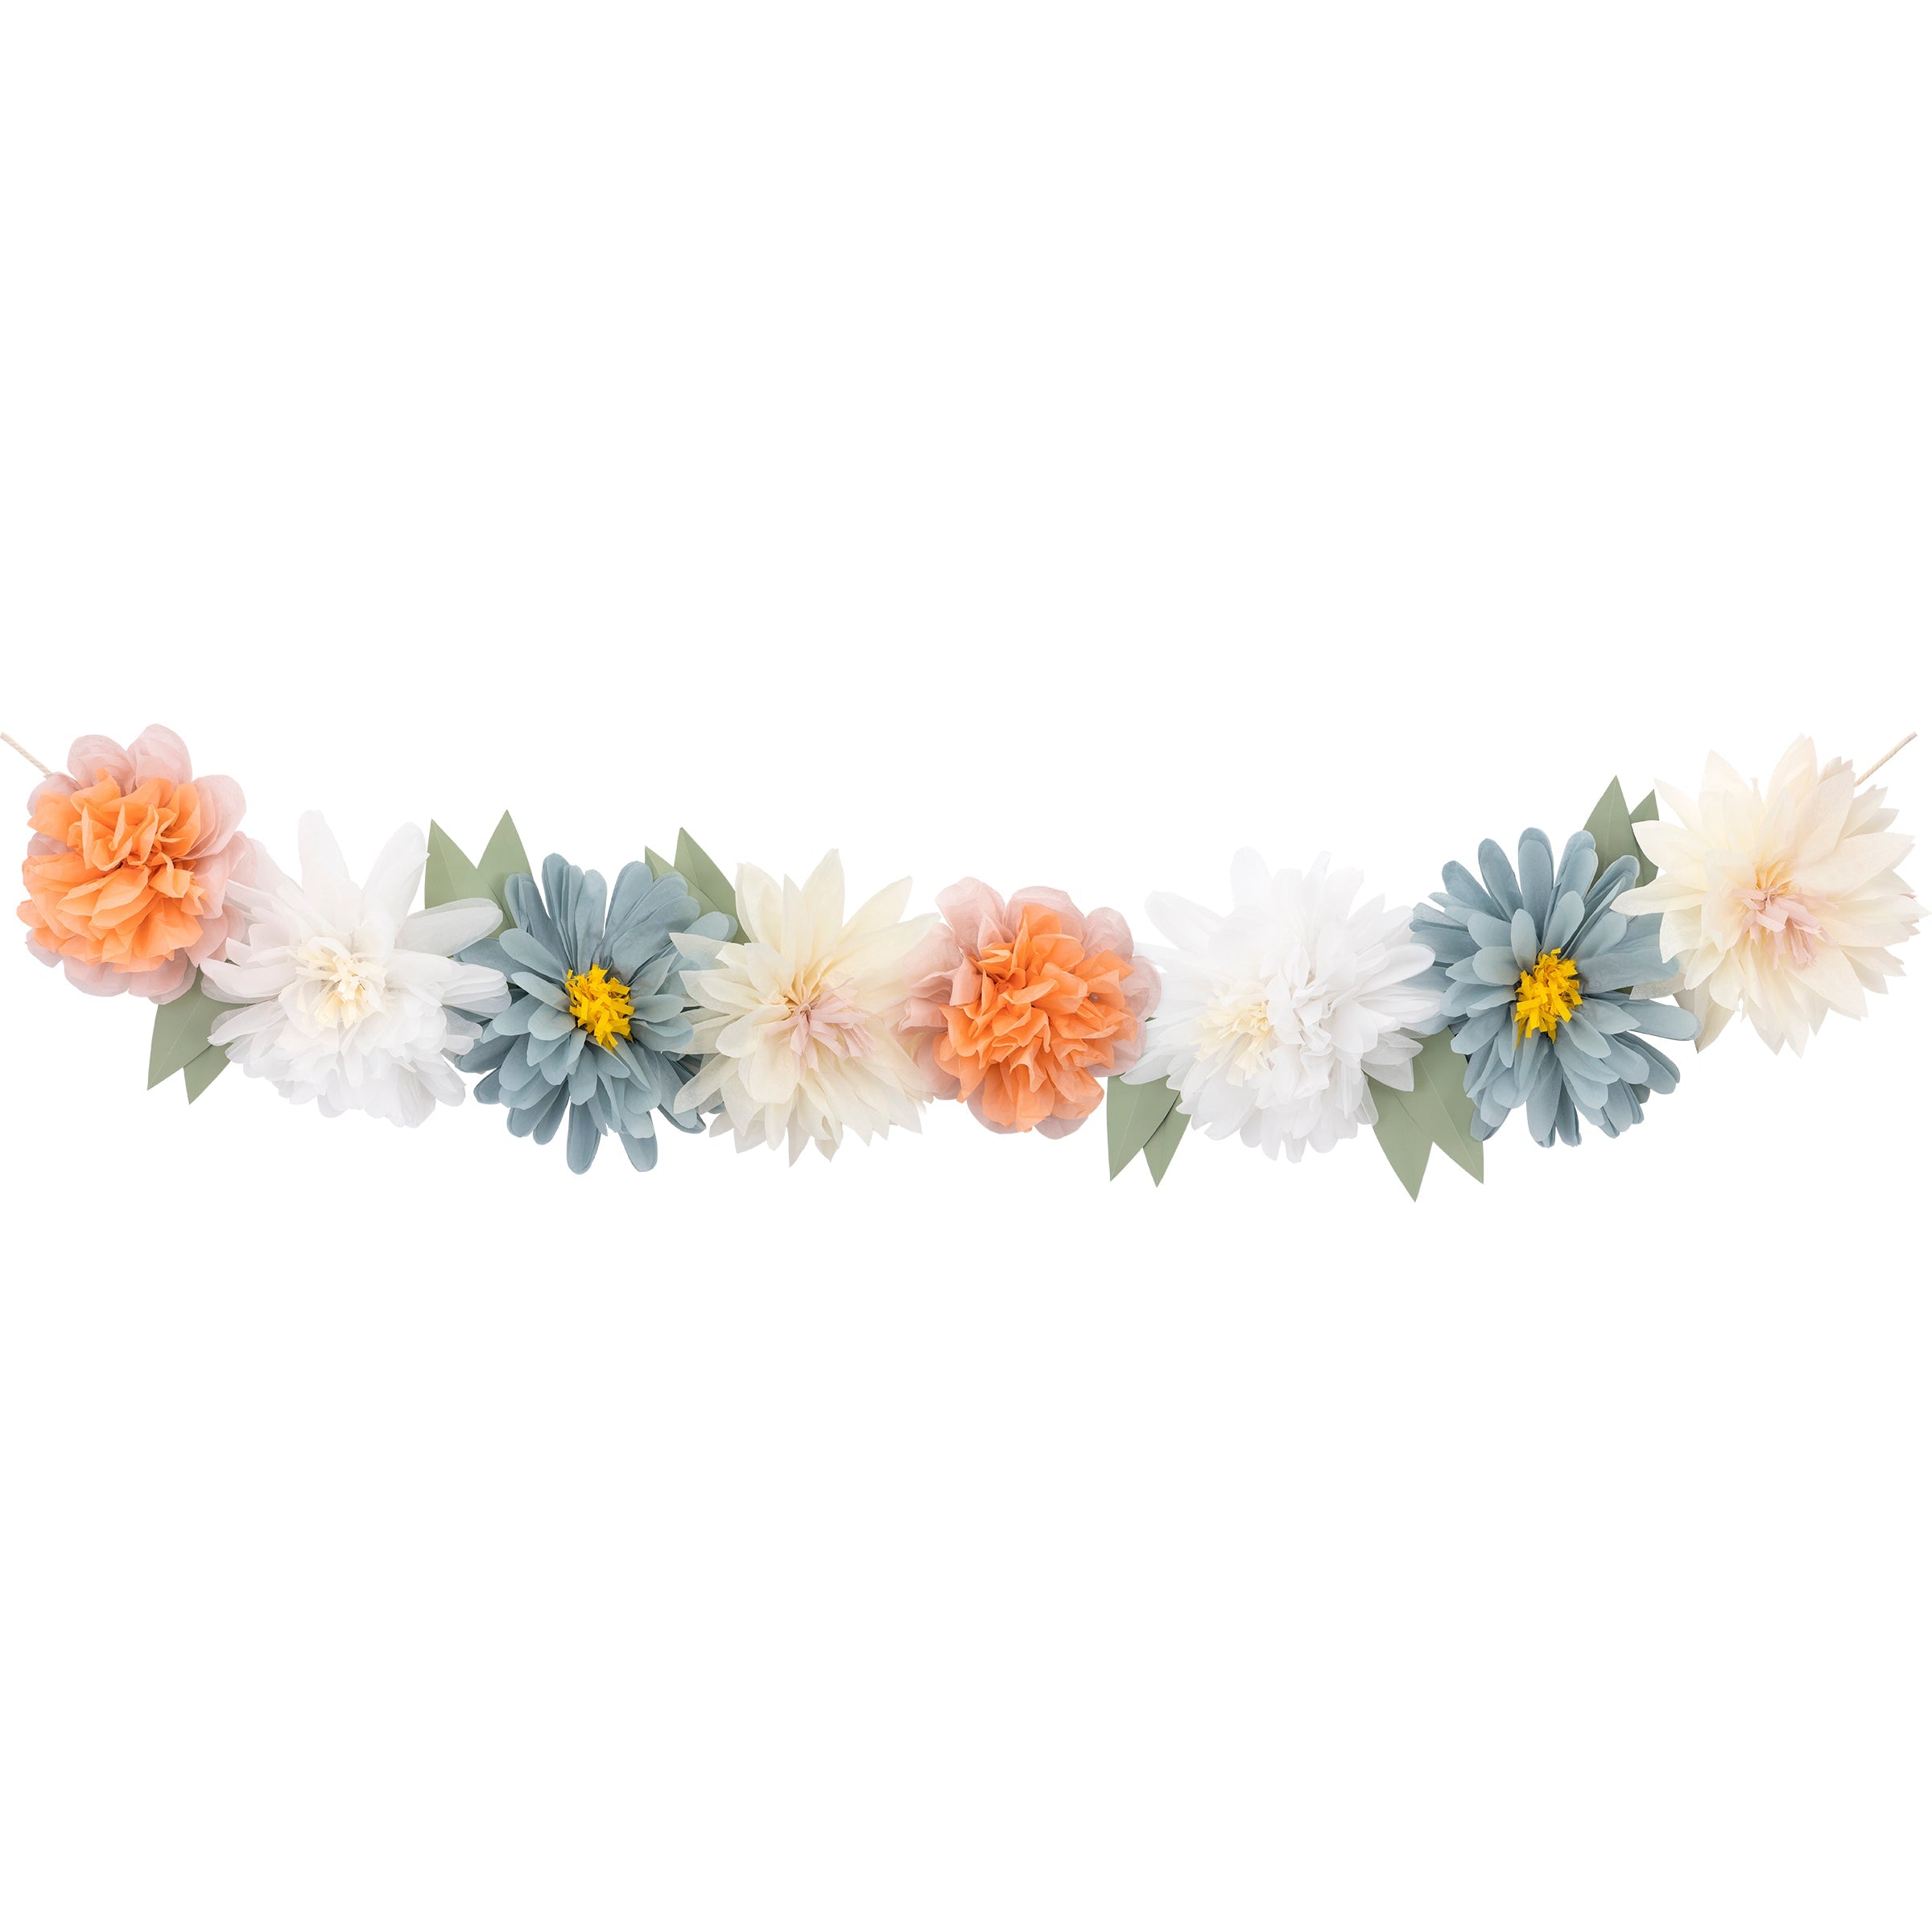 Our reusable flower garland is crafted from colourful tissue paper decorations.